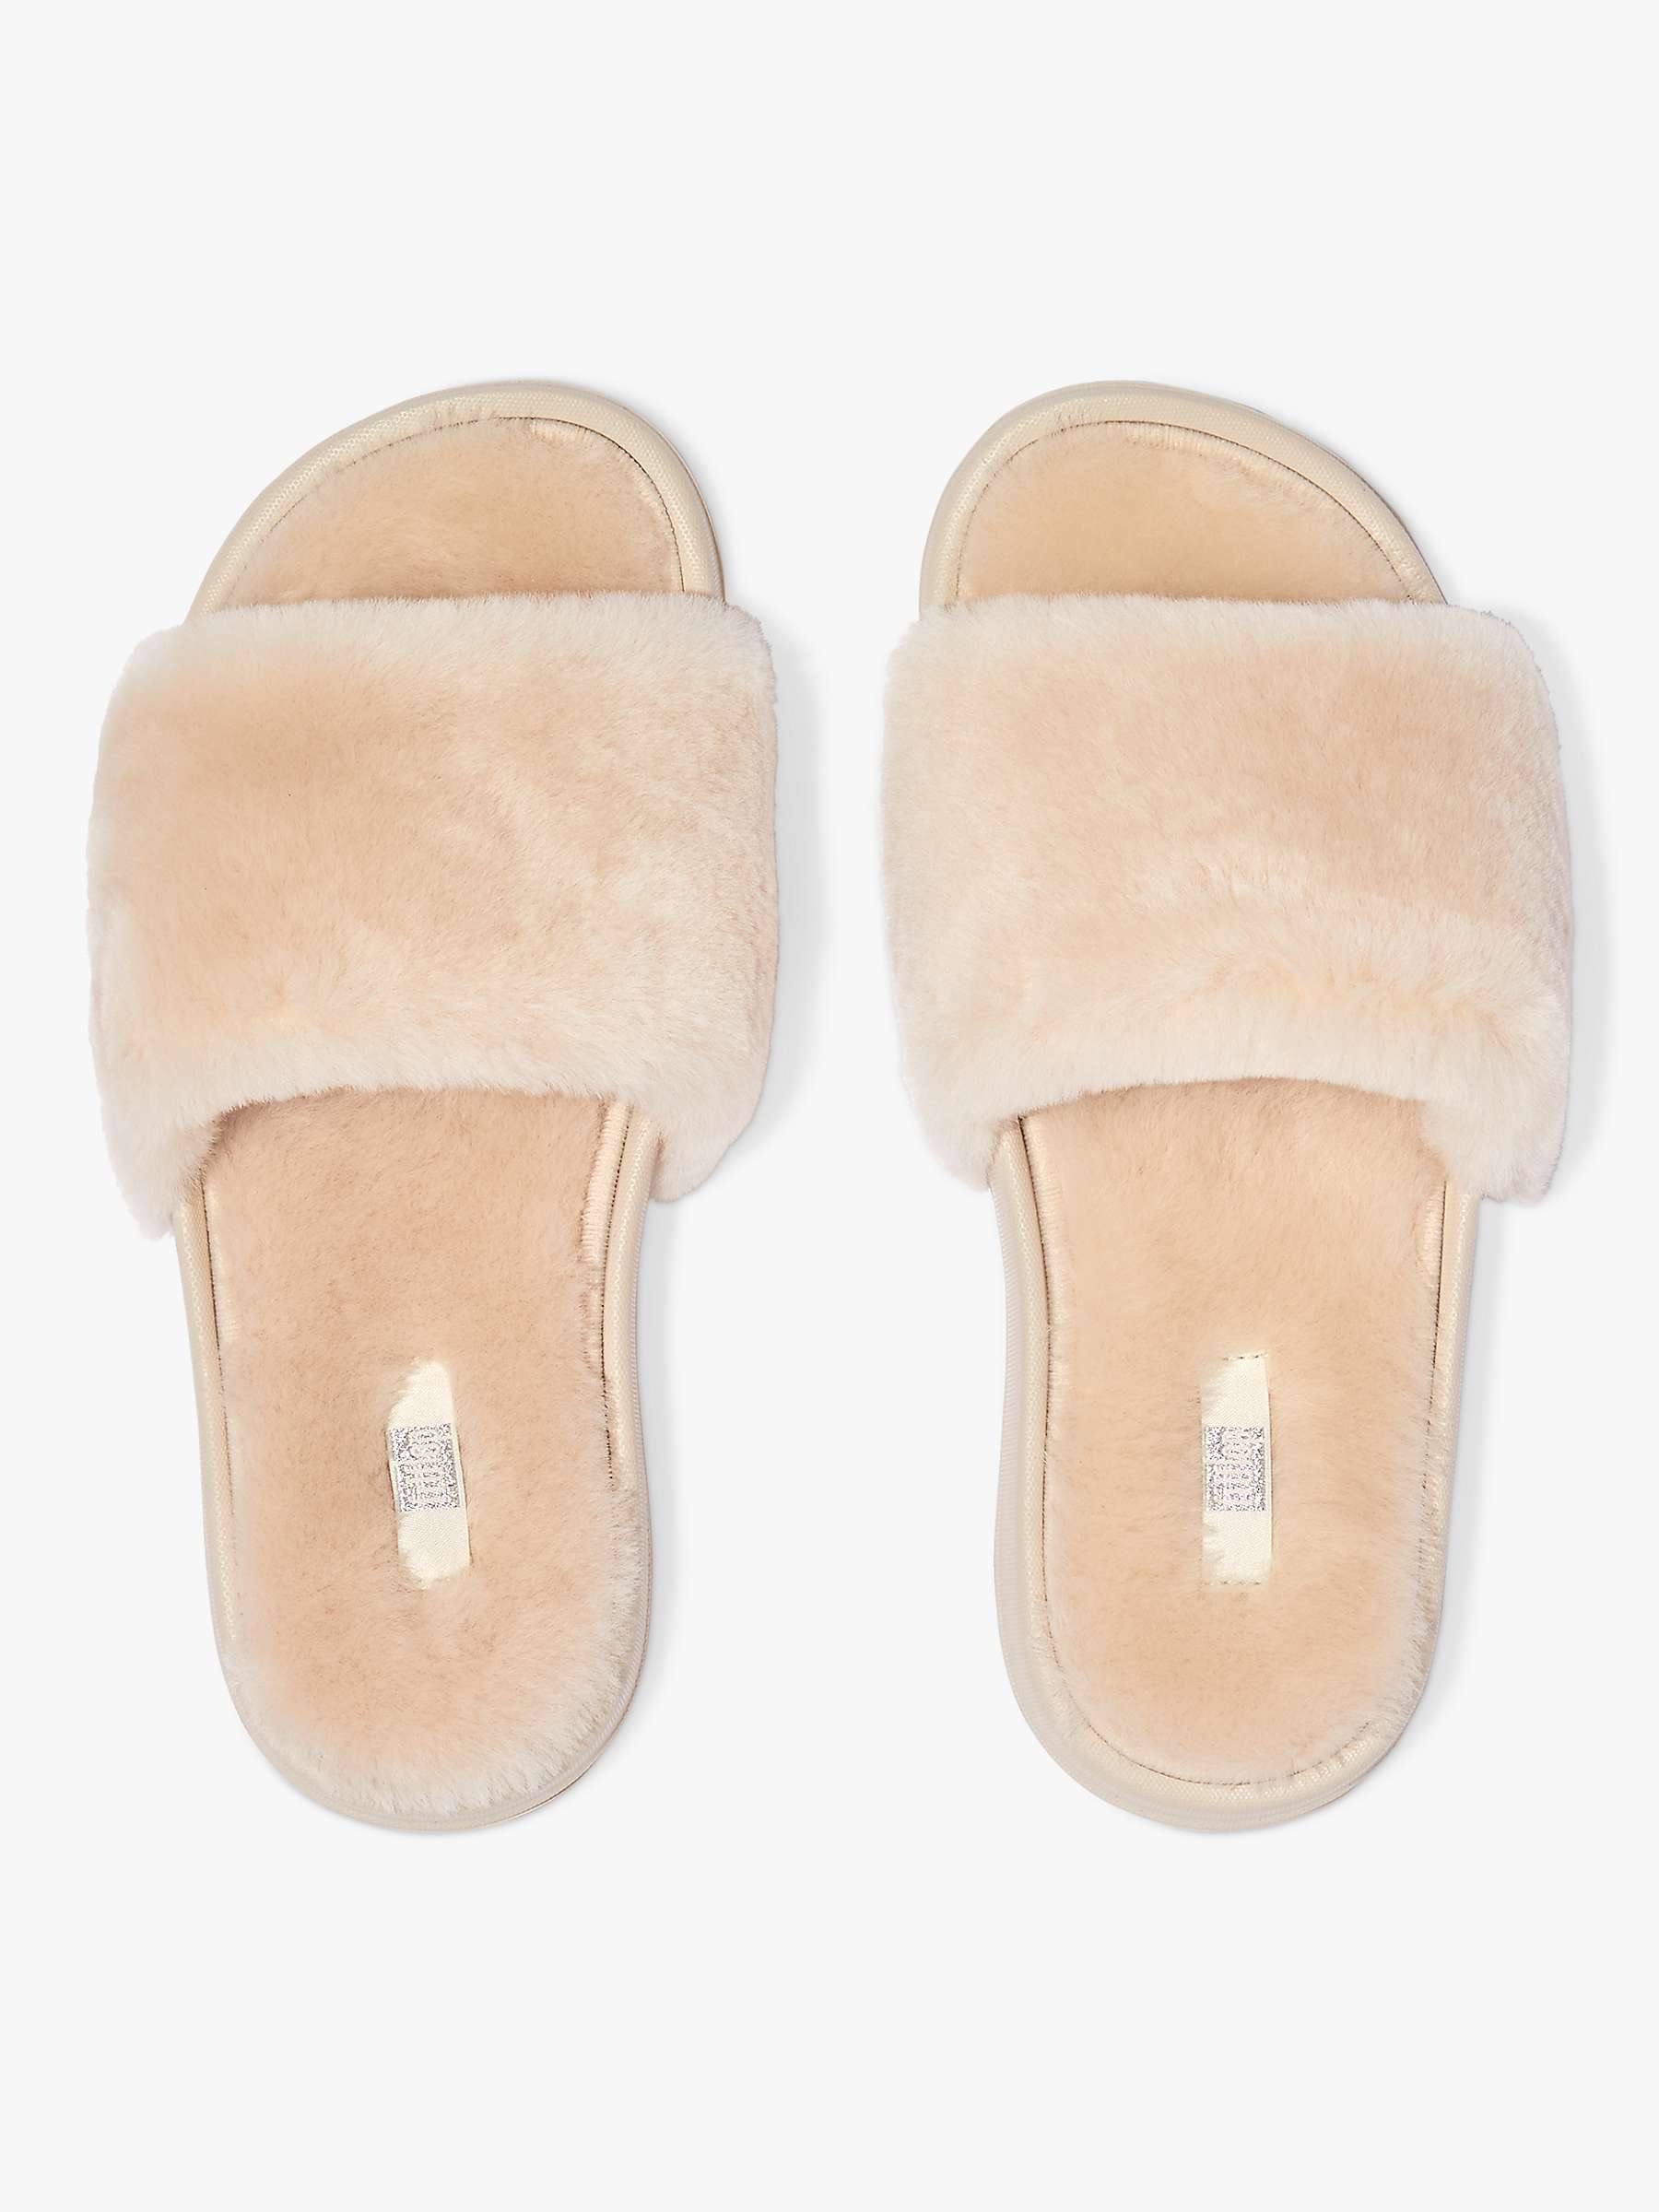 Buy FitFlop IQushion Shearling Sliders Online at johnlewis.com